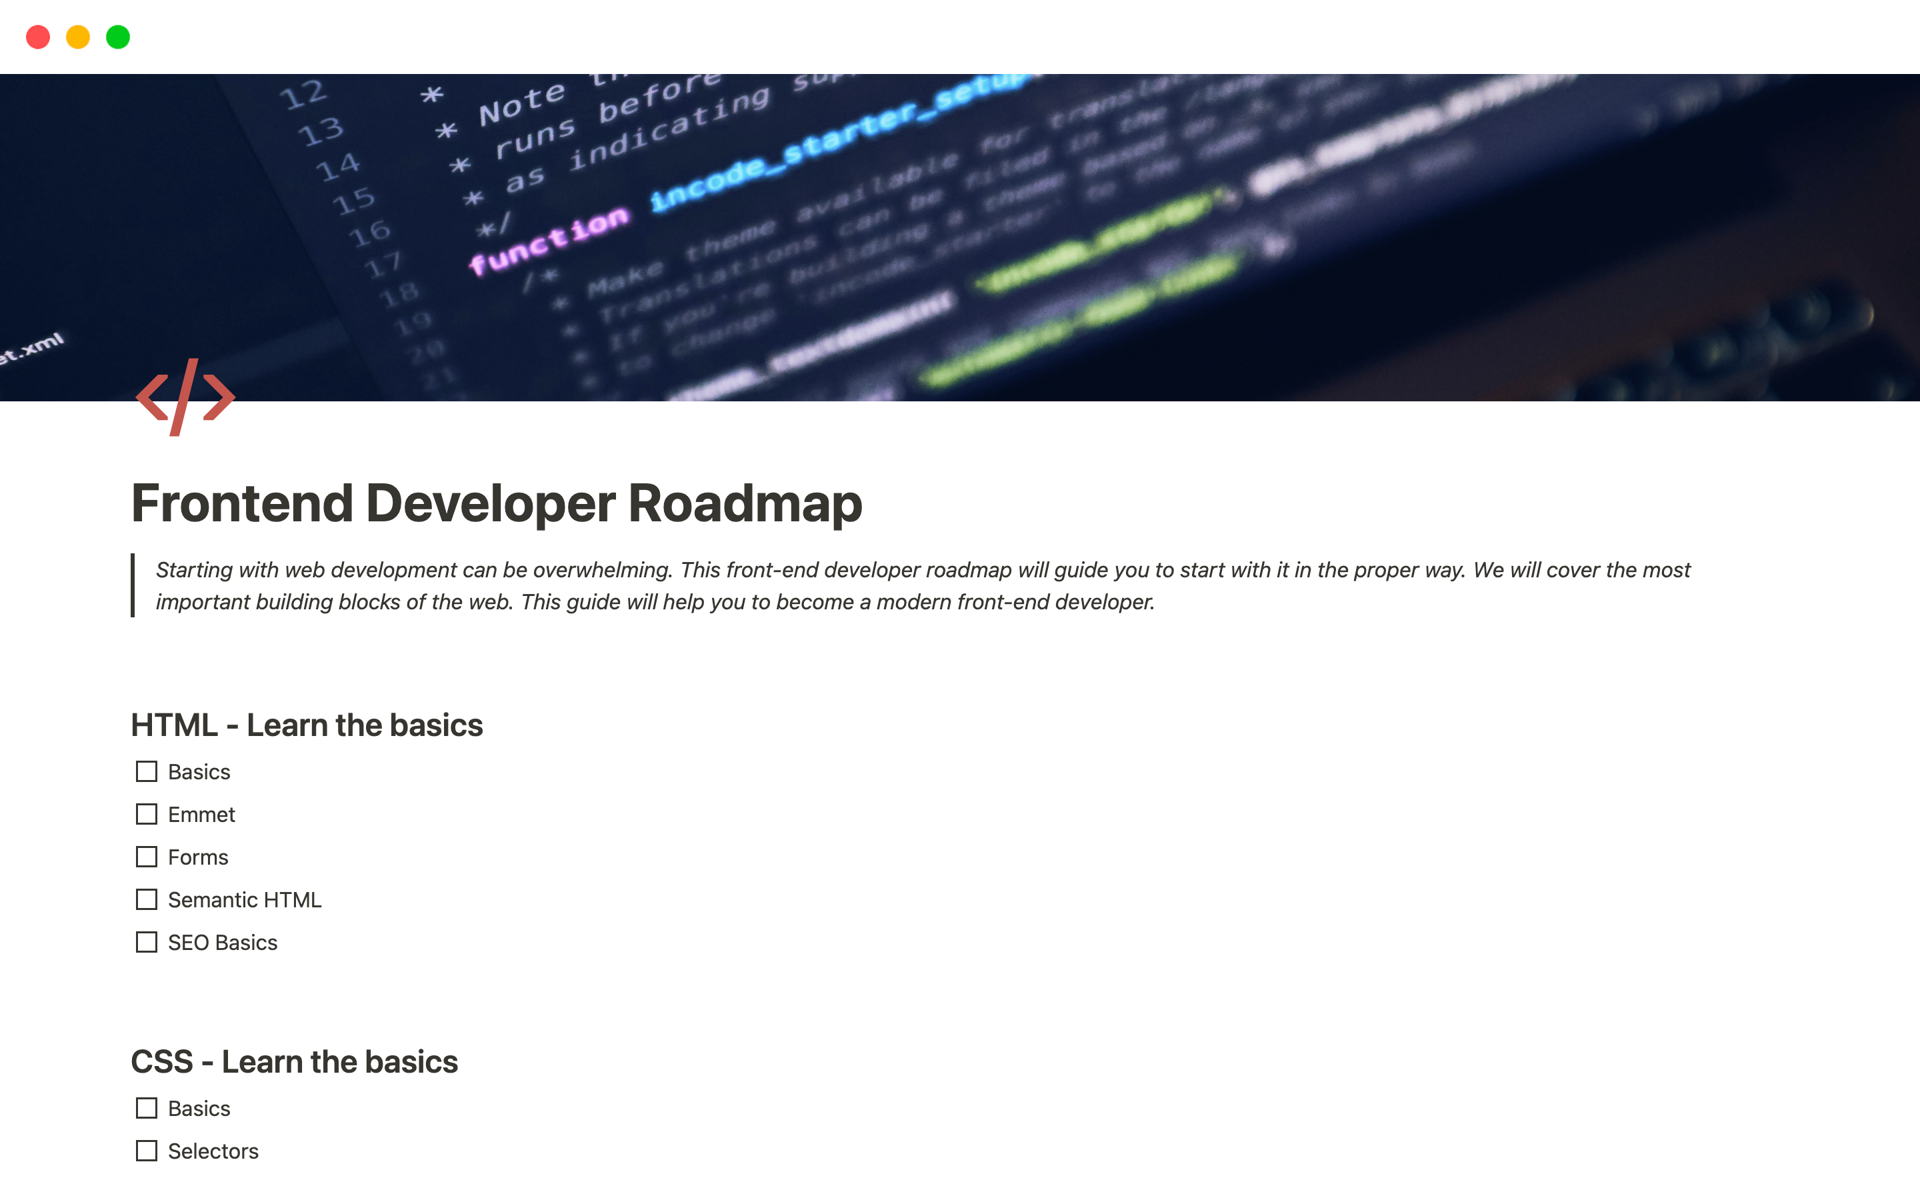 Roadmap for becoming frontend developers.